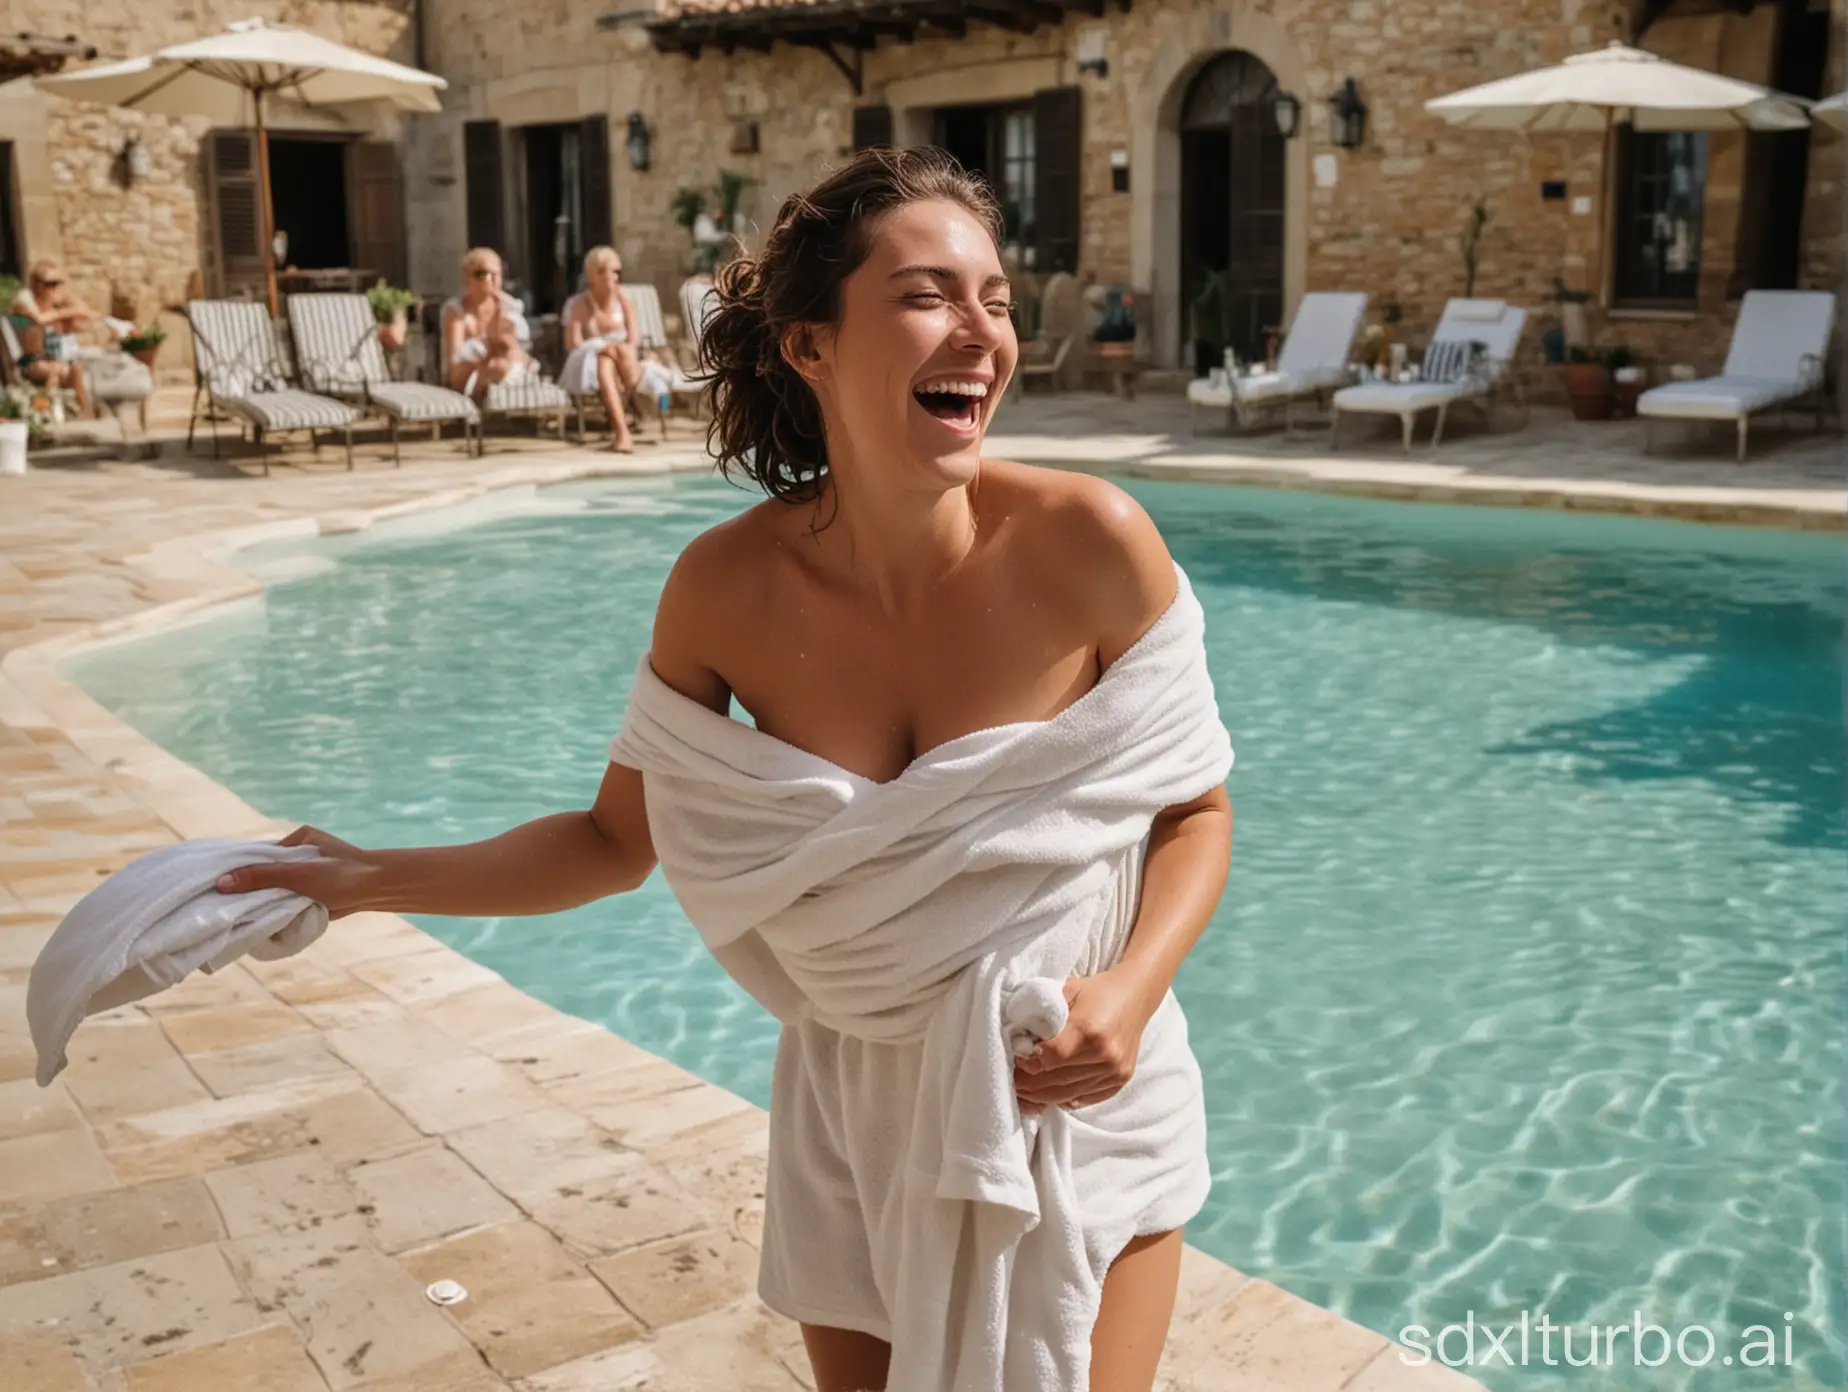 A woman has wrapped a towel around herself. She is standing in front of a pool in Tuscany. She laughs at the crowd of people watching her.